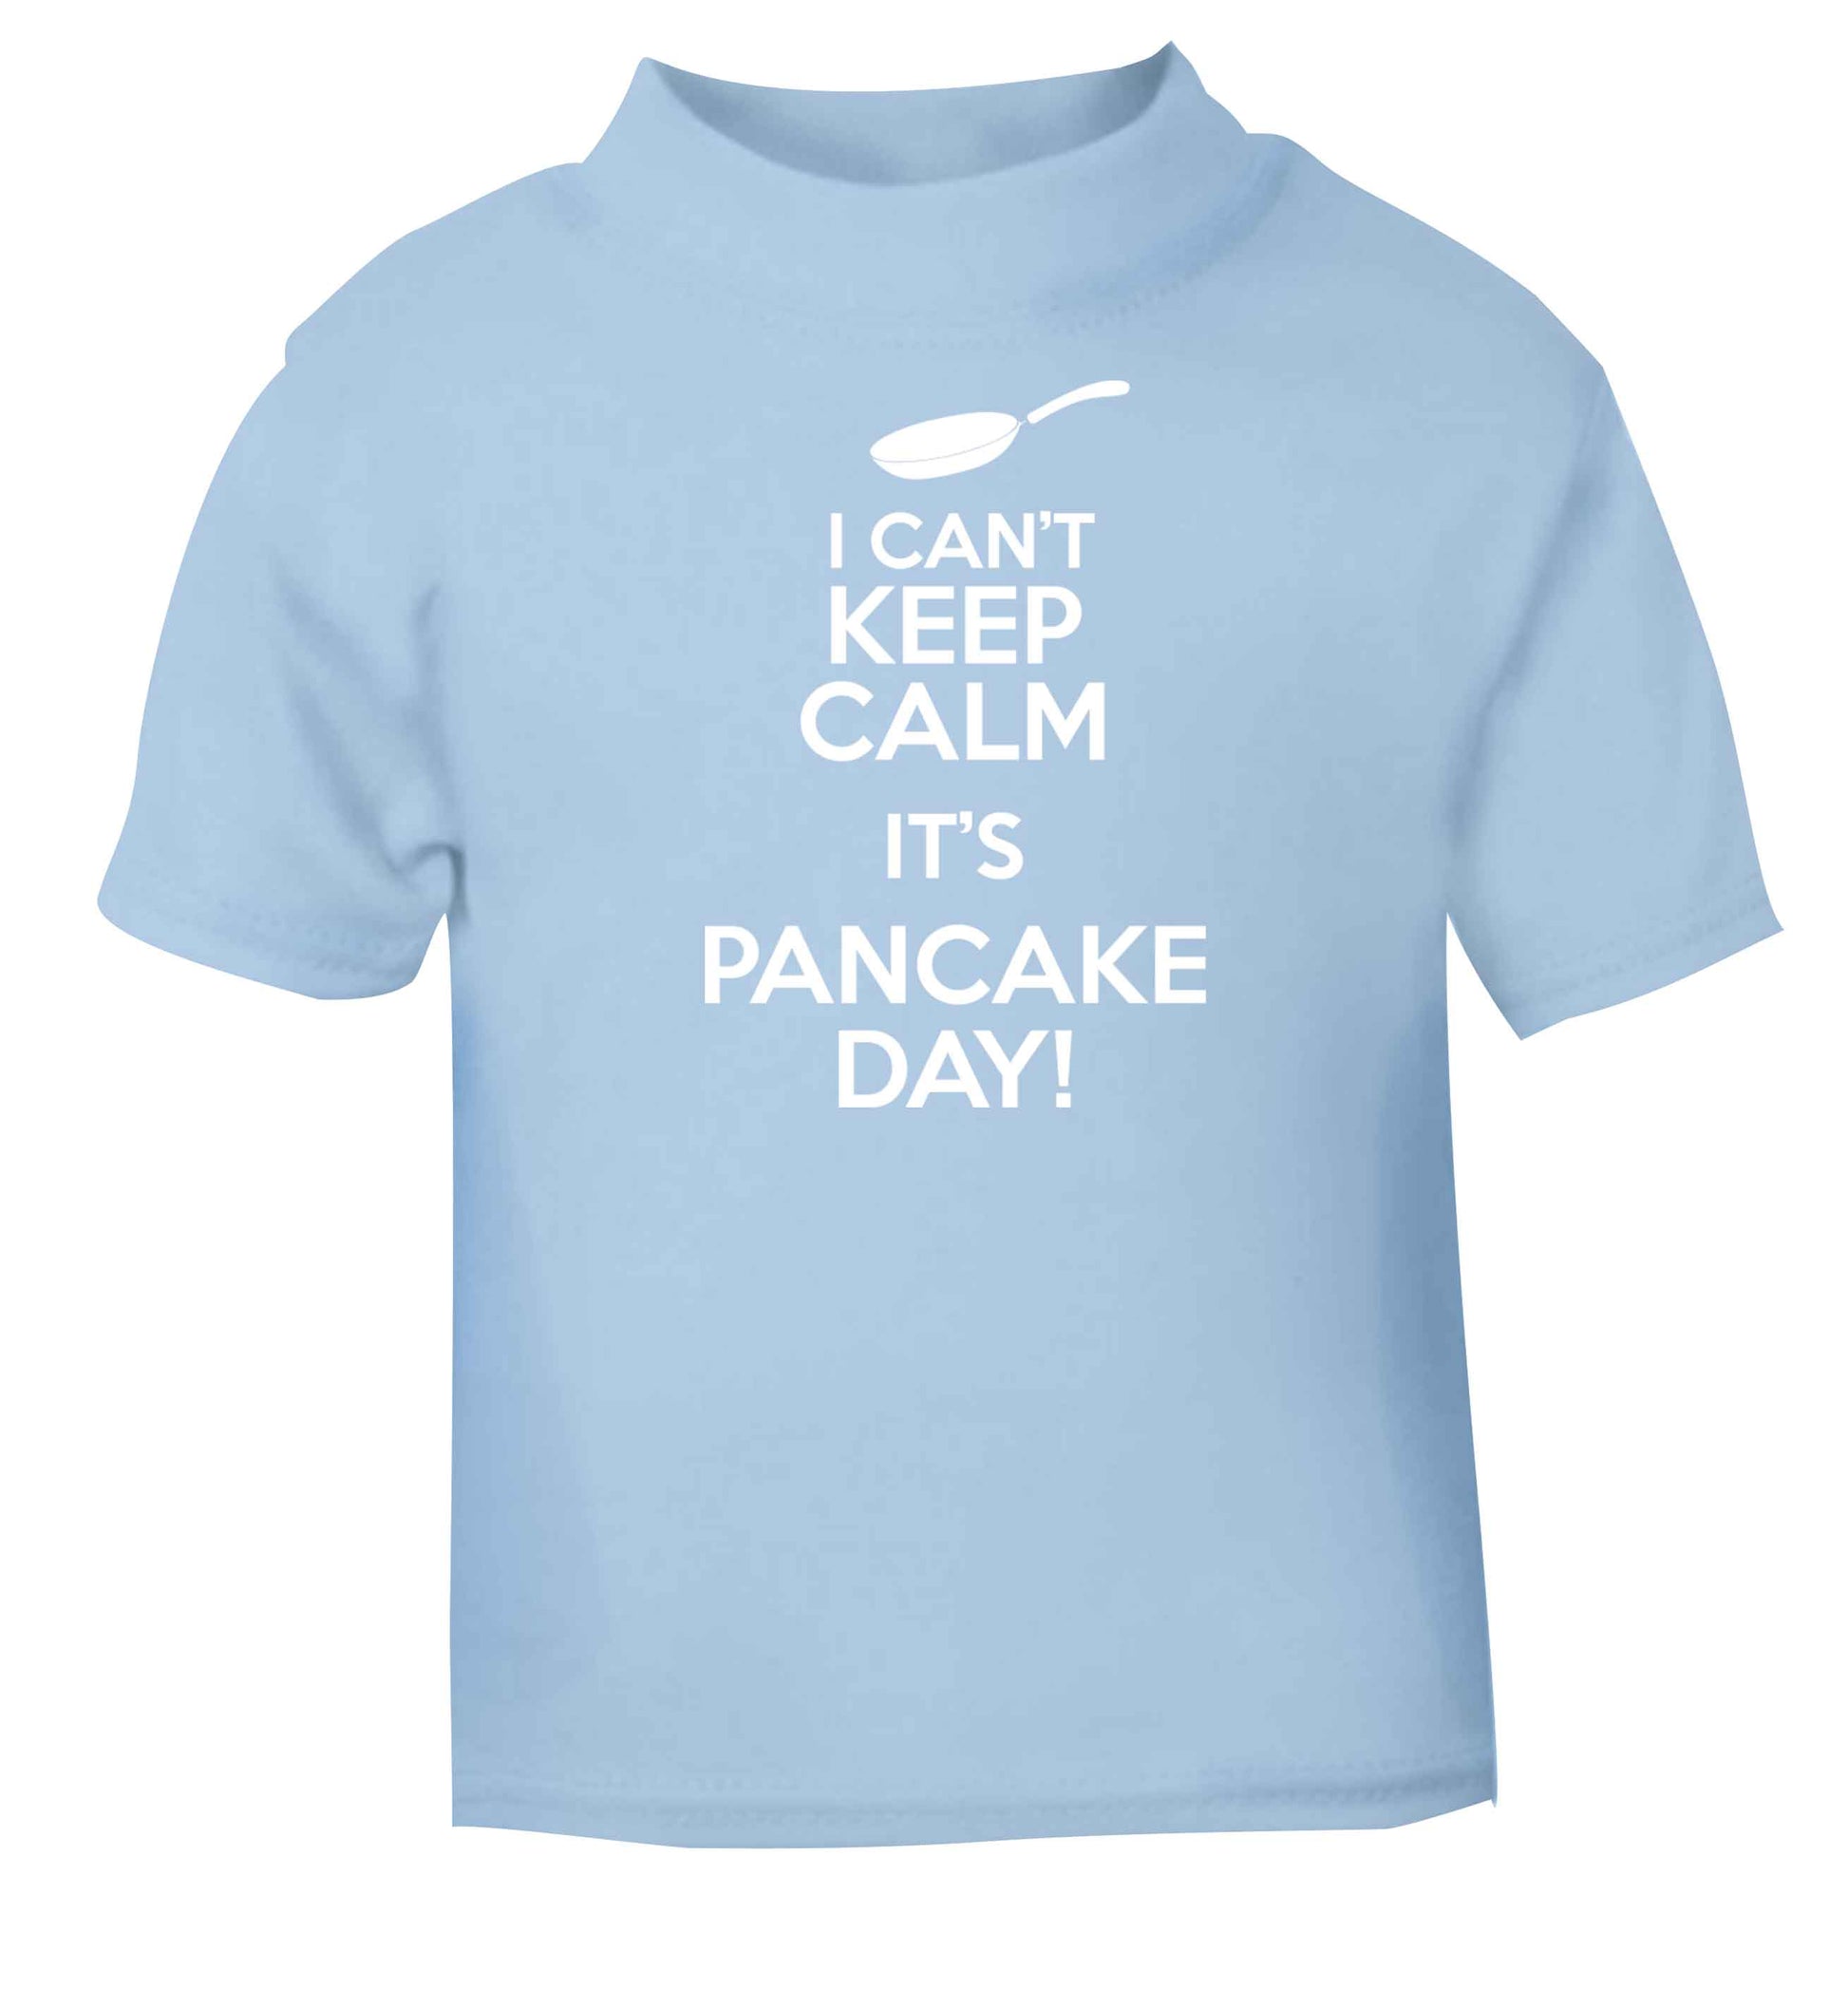 I can't keep calm it's pancake day! light blue baby toddler Tshirt 2 Years